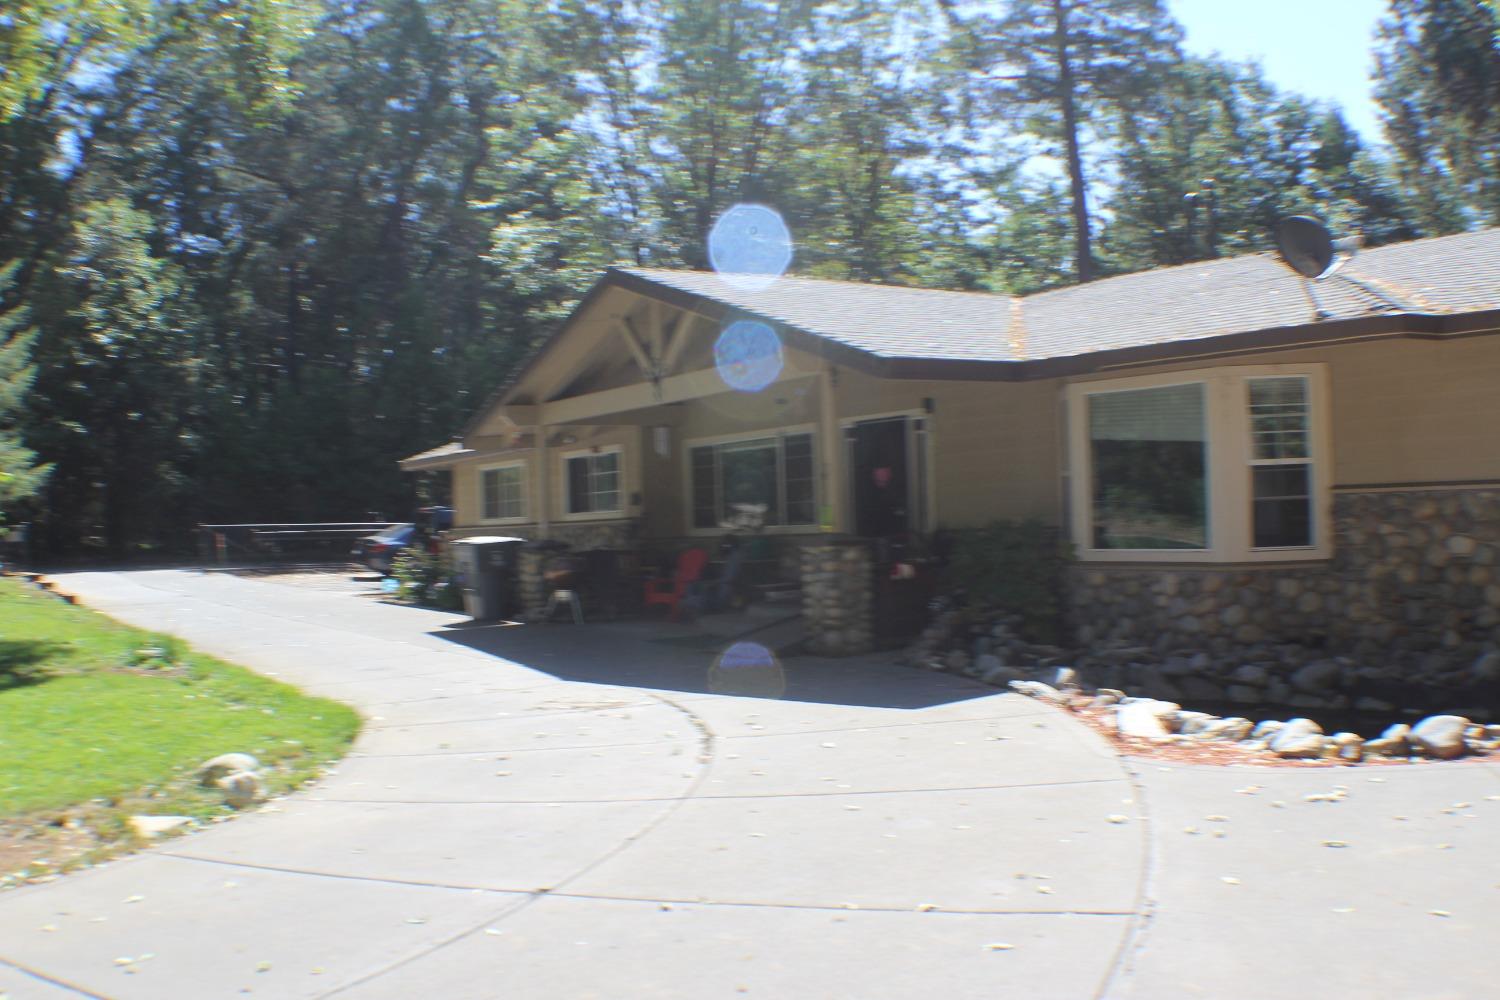 Photo of 22620 Foresthill Rd in Foresthill, CA